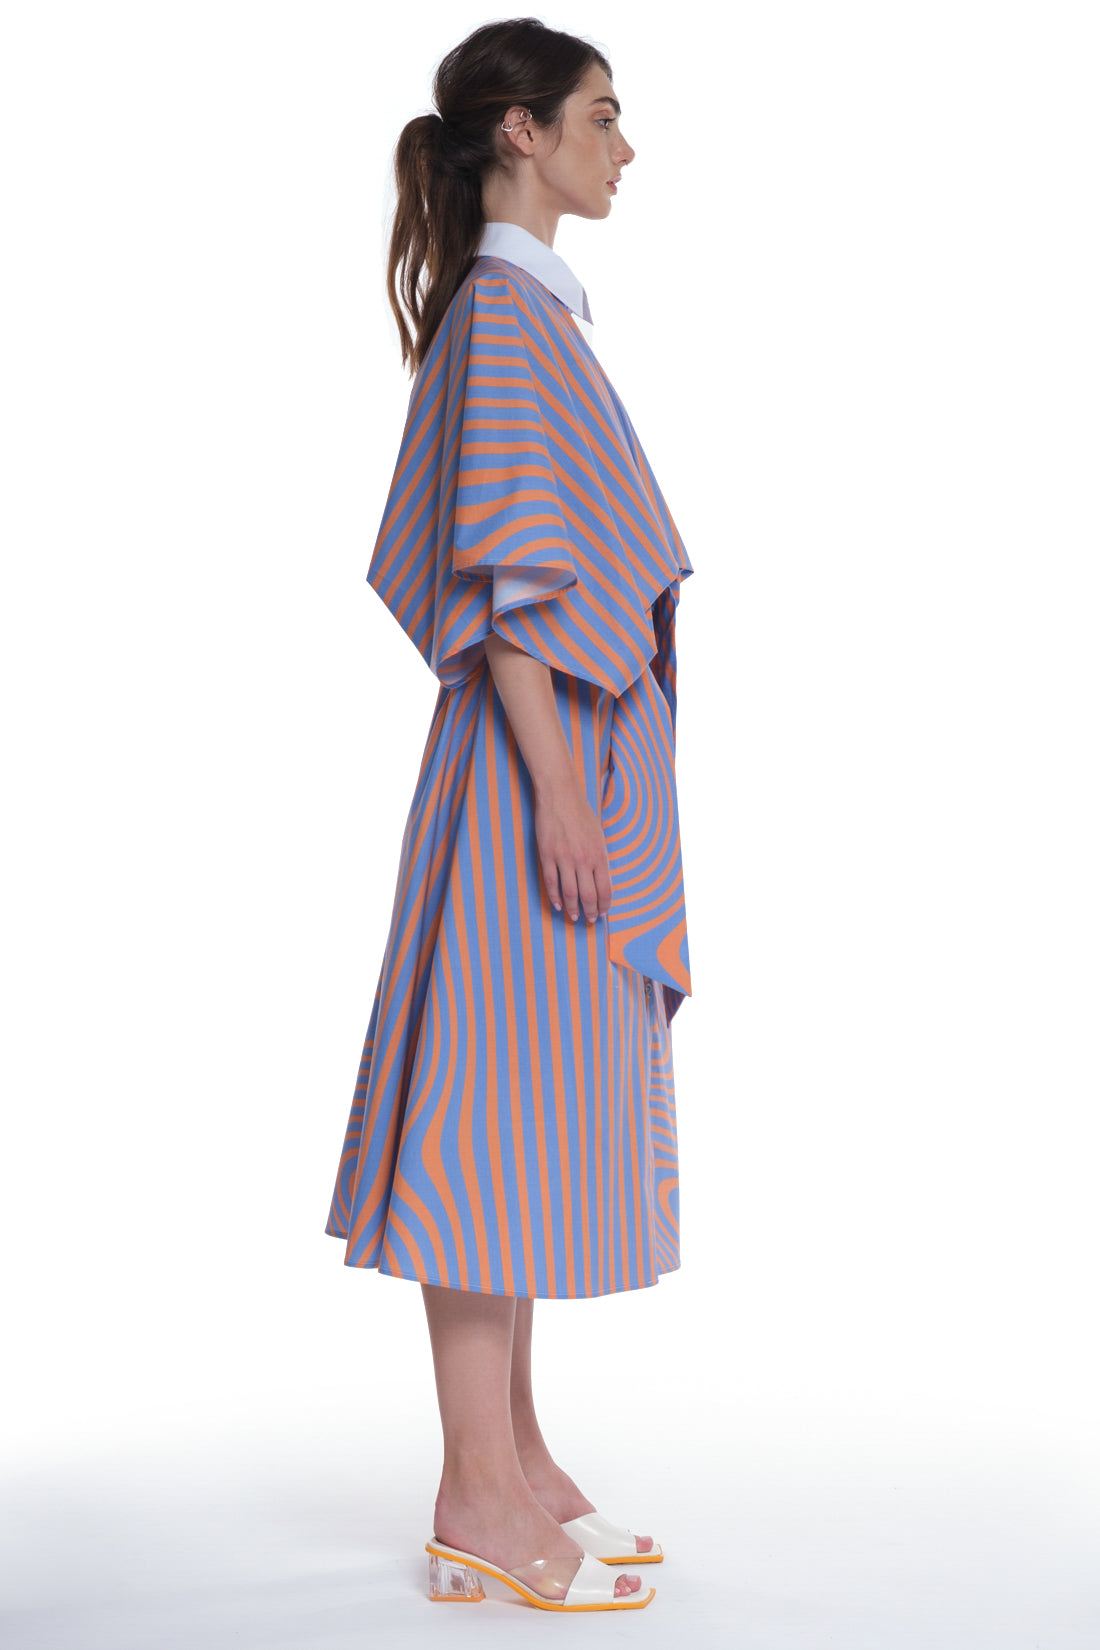 PRINTED LONG SHIRT-DRESS, BUTTONING IN FRONT, HIGH COLLAR, TIED WITH A BELT IN FRONT